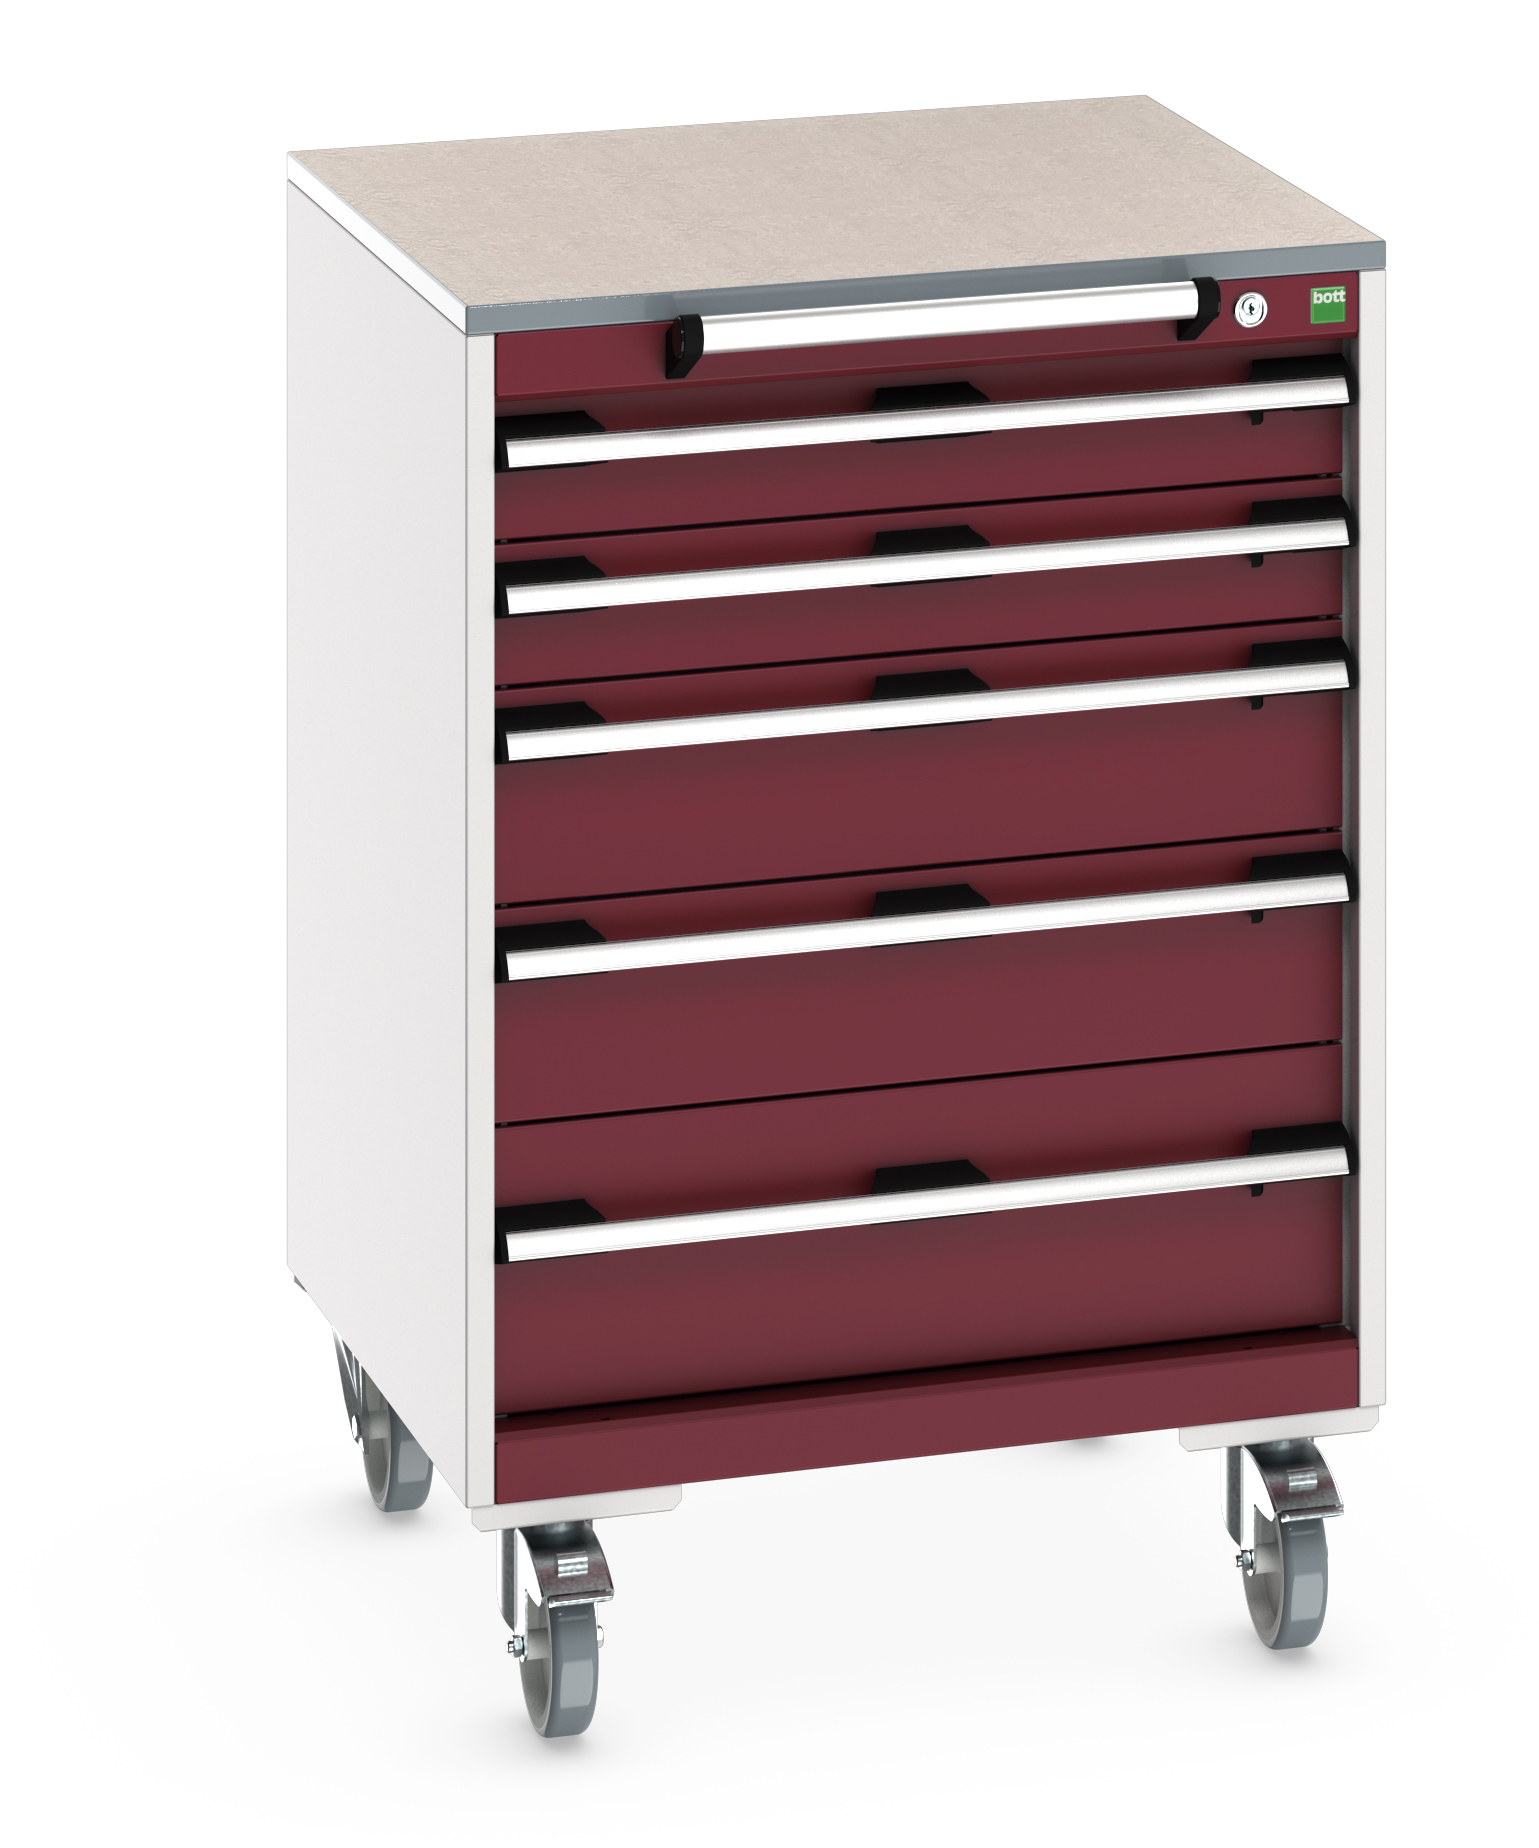 Bott Cubio Mobile Drawer Cabinet With 5 Drawers & Lino Worktop - 40402150.24V